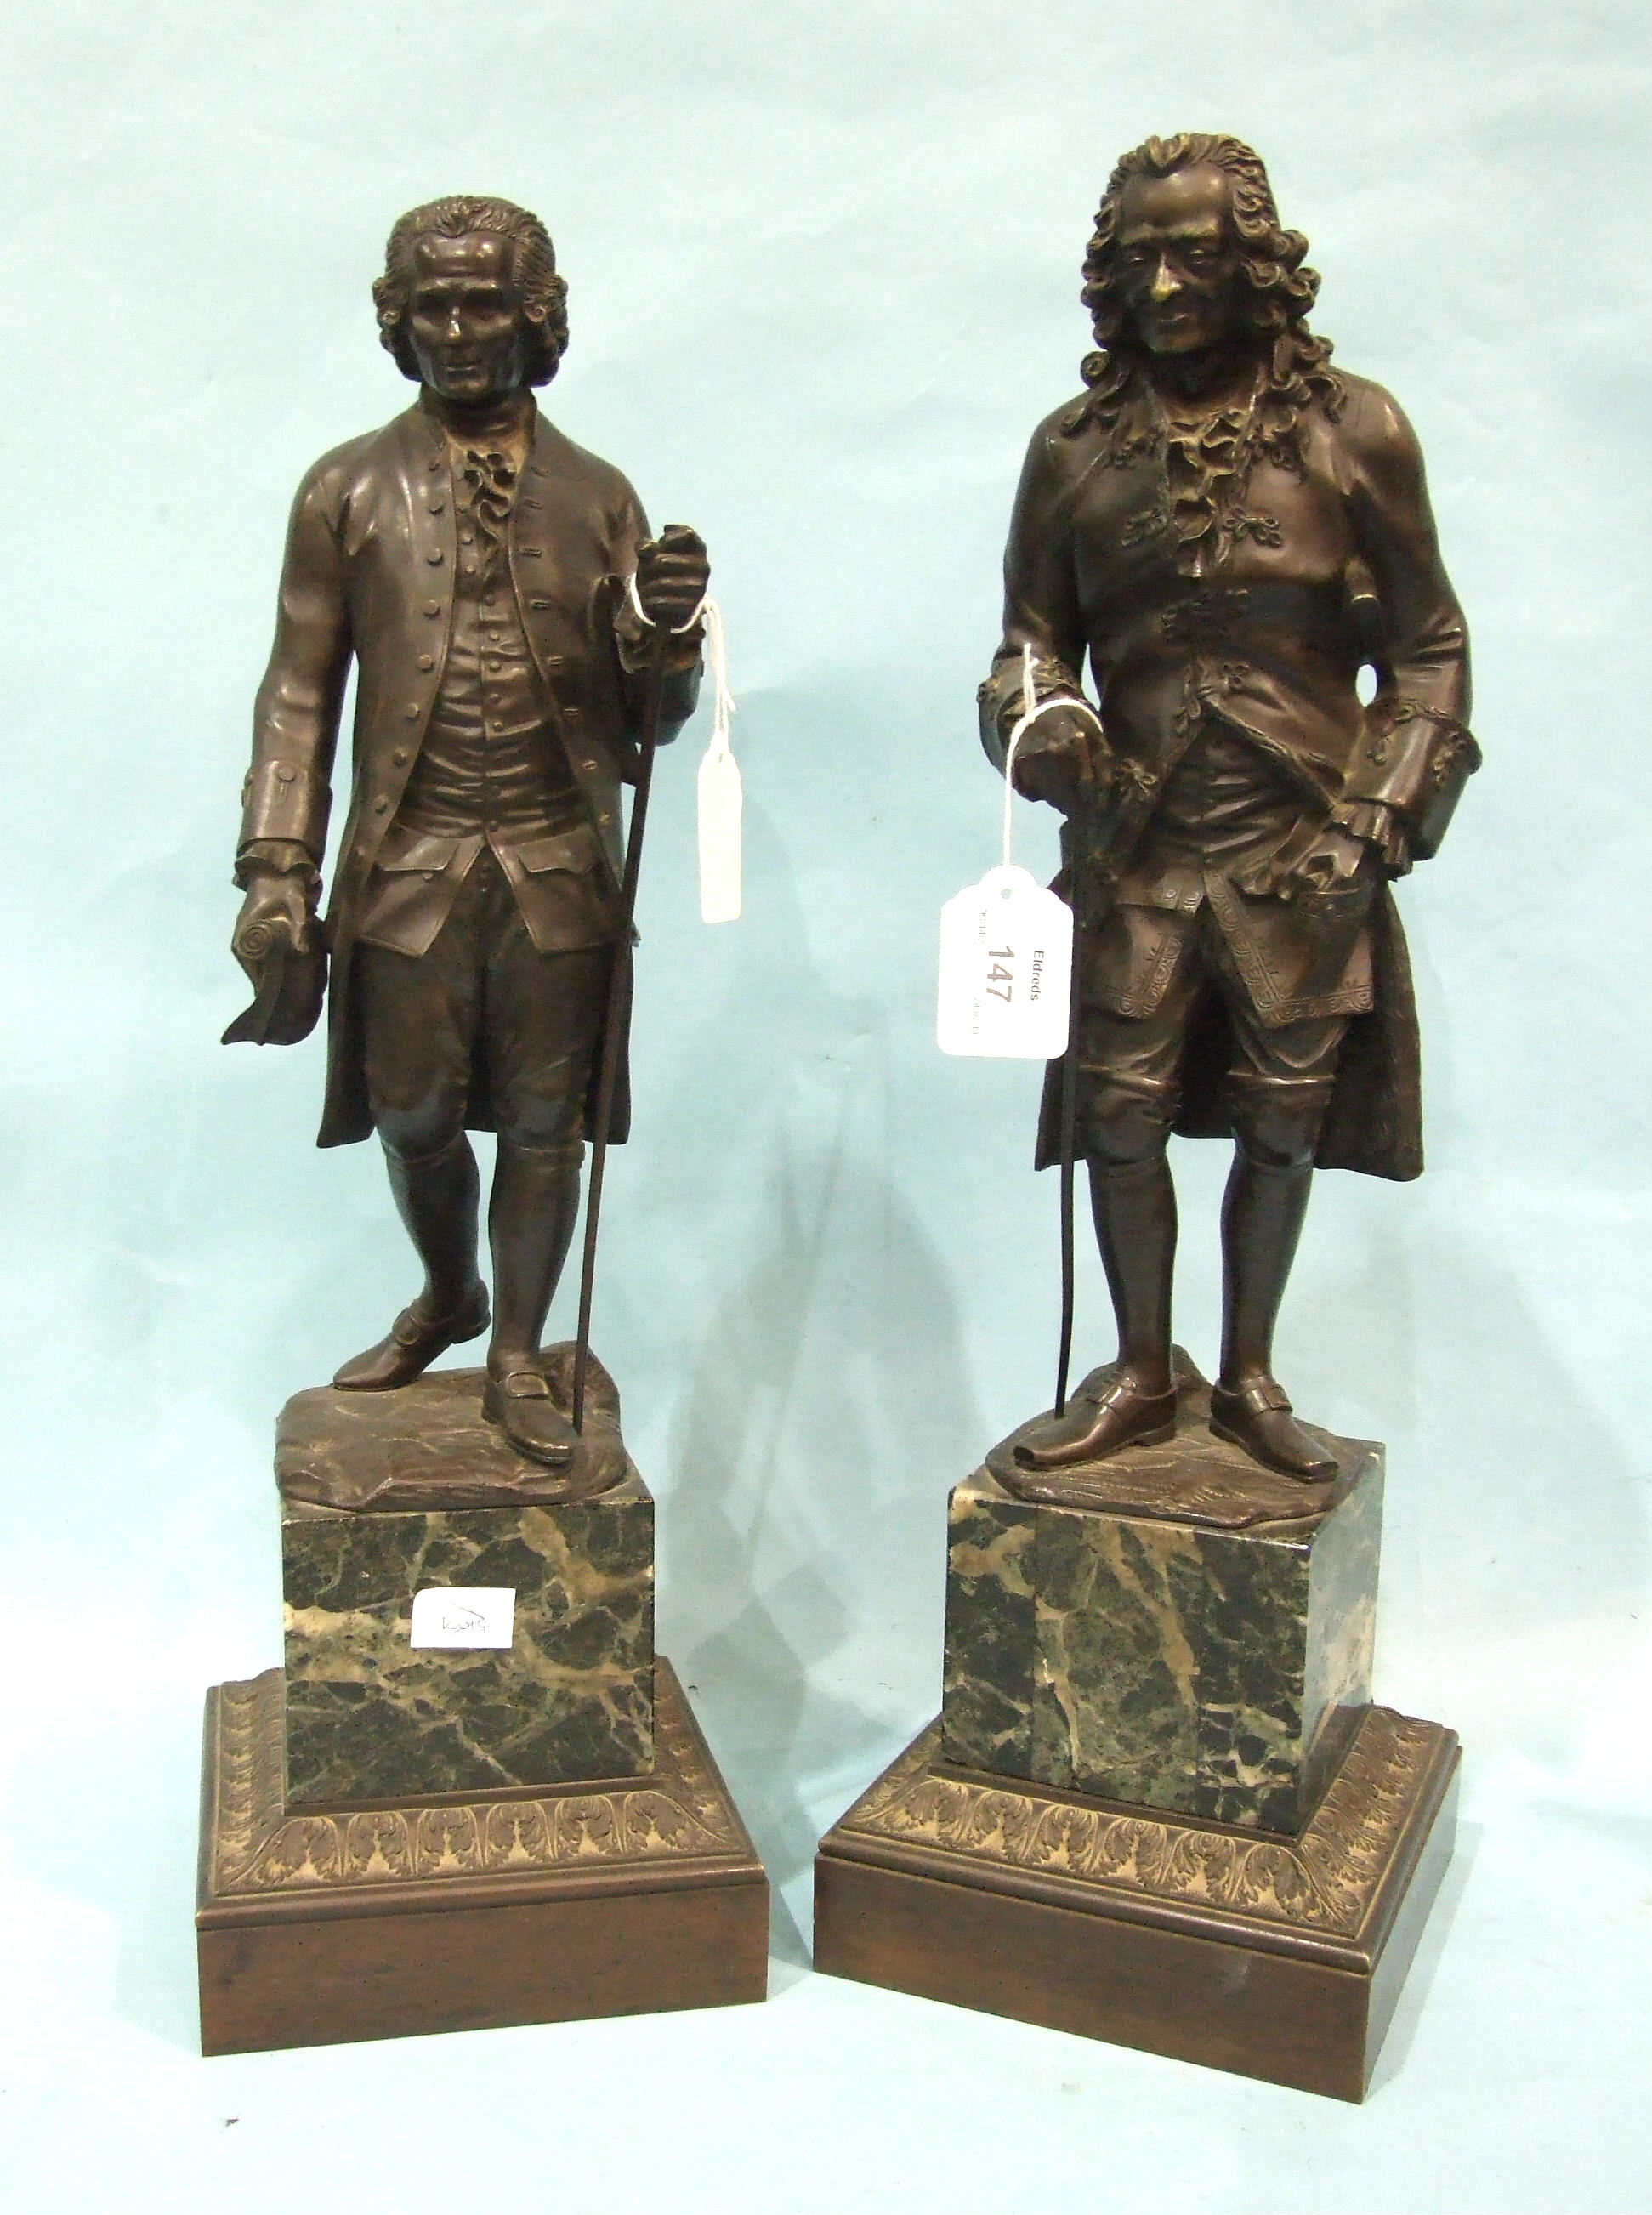 A pair of 19th century French bronze figures after Jean-Claude Rosset of Voltaire and Rousseau, each